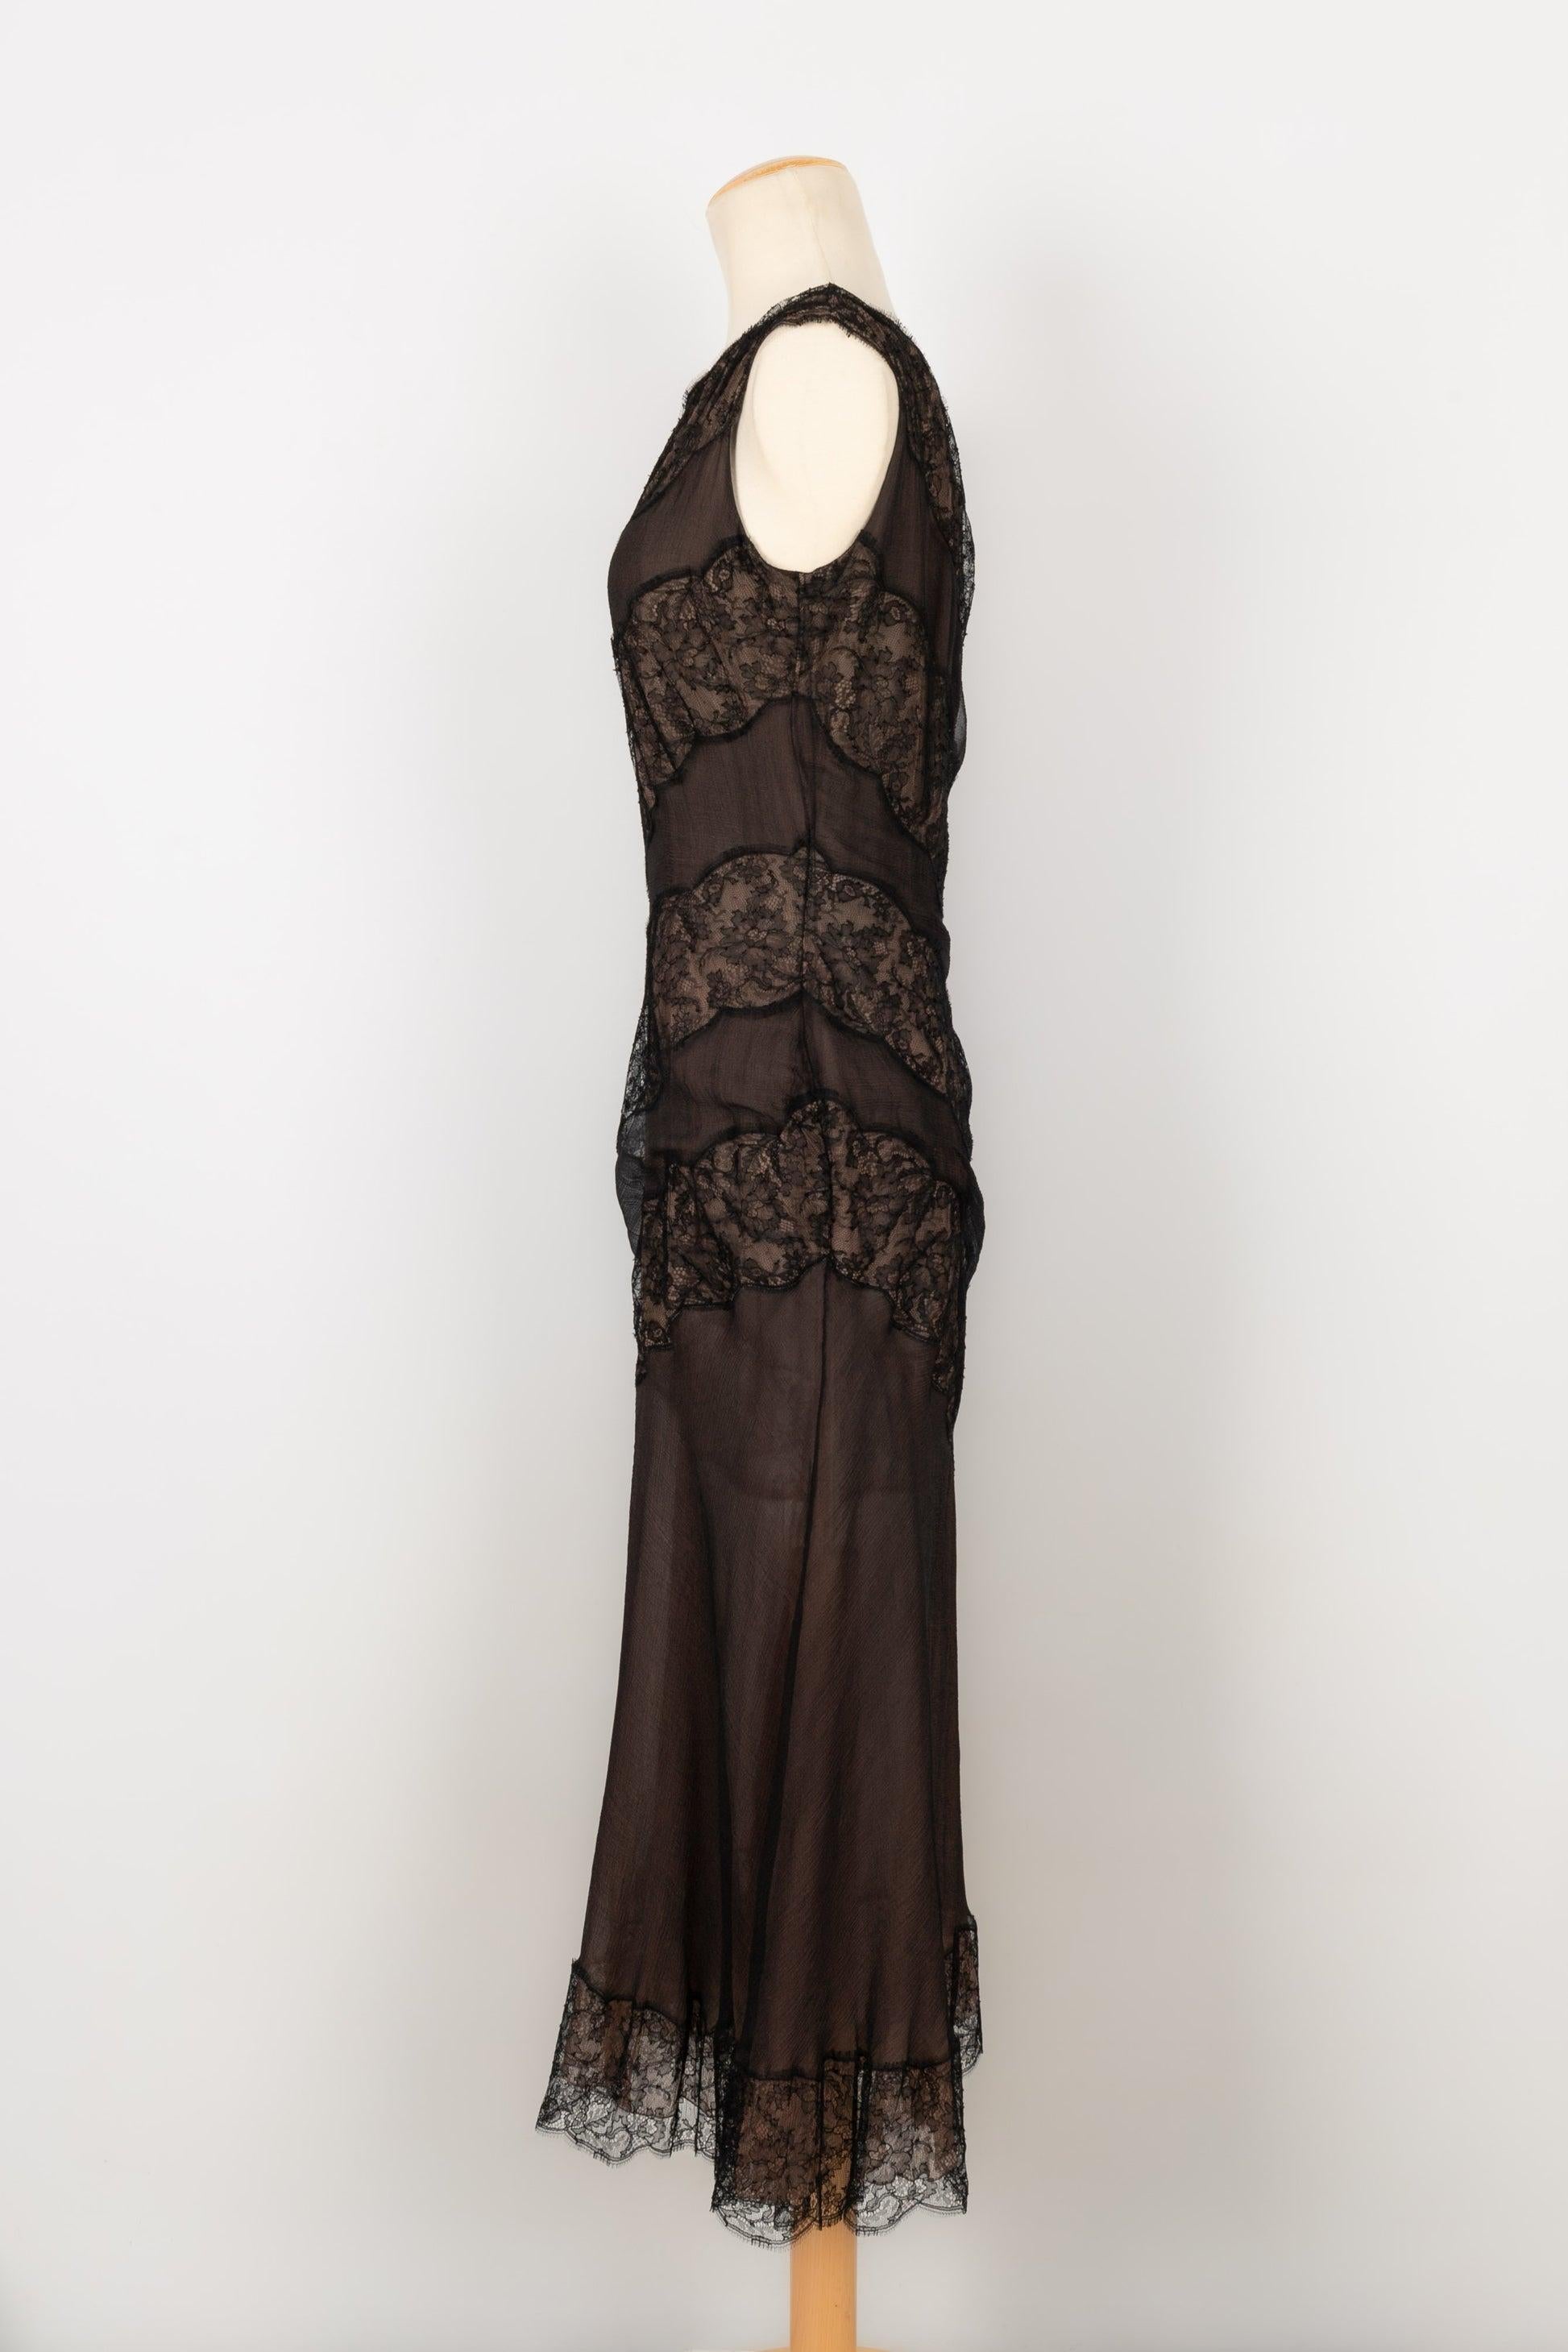 Women's Balmain Couture Dress in Silk Crepe and Transparent Black Lace, circa 1990s For Sale